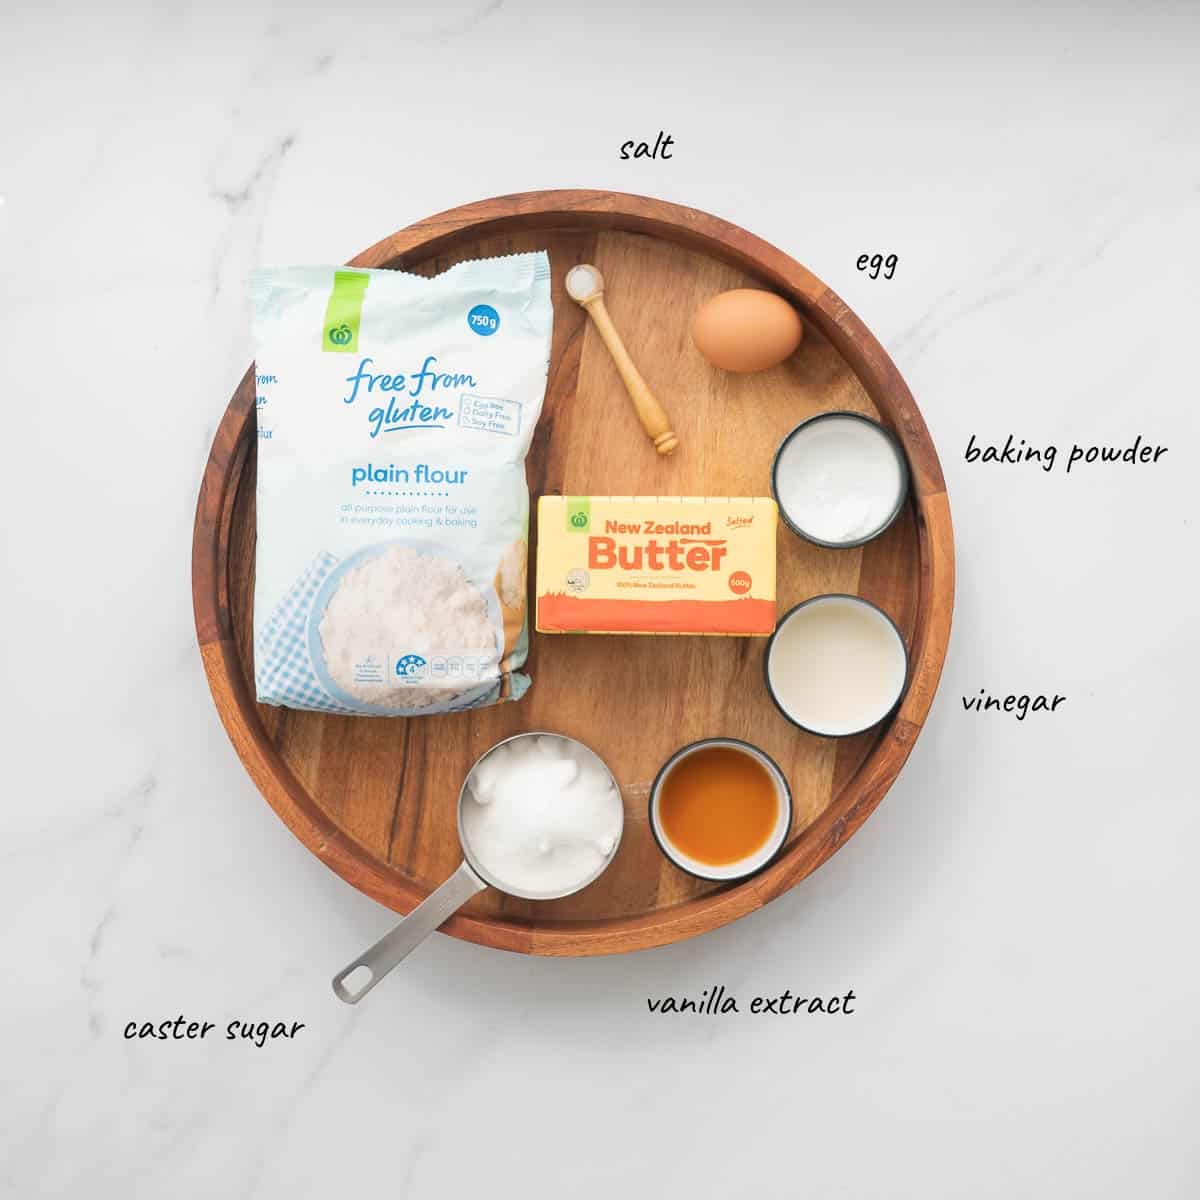 The ingredietns to make Gluten Free sugar cookies on a round wooden tray with text overlay.